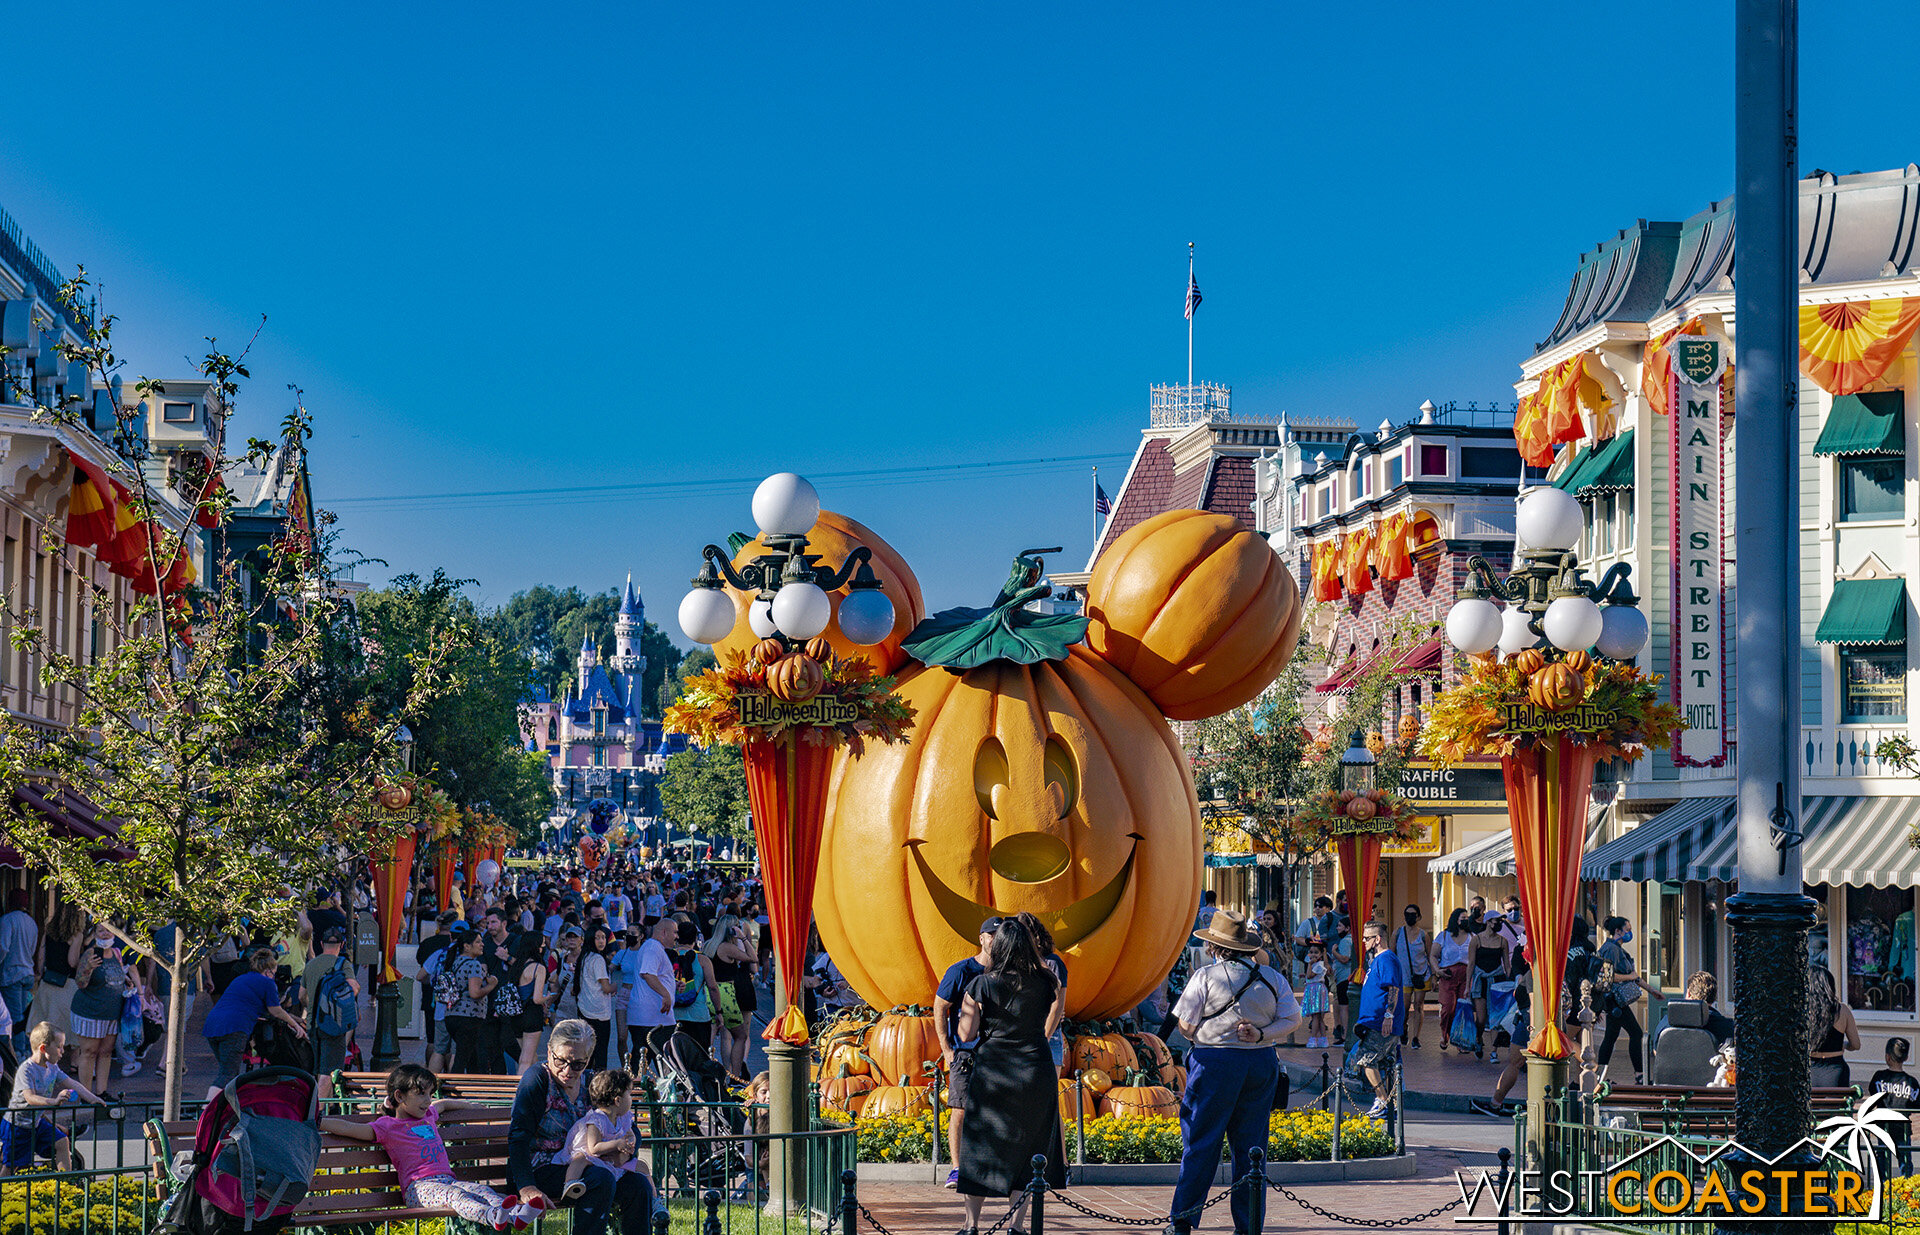  The Mickey pumpkin photo op is back, complete with long lines all day and night long. 